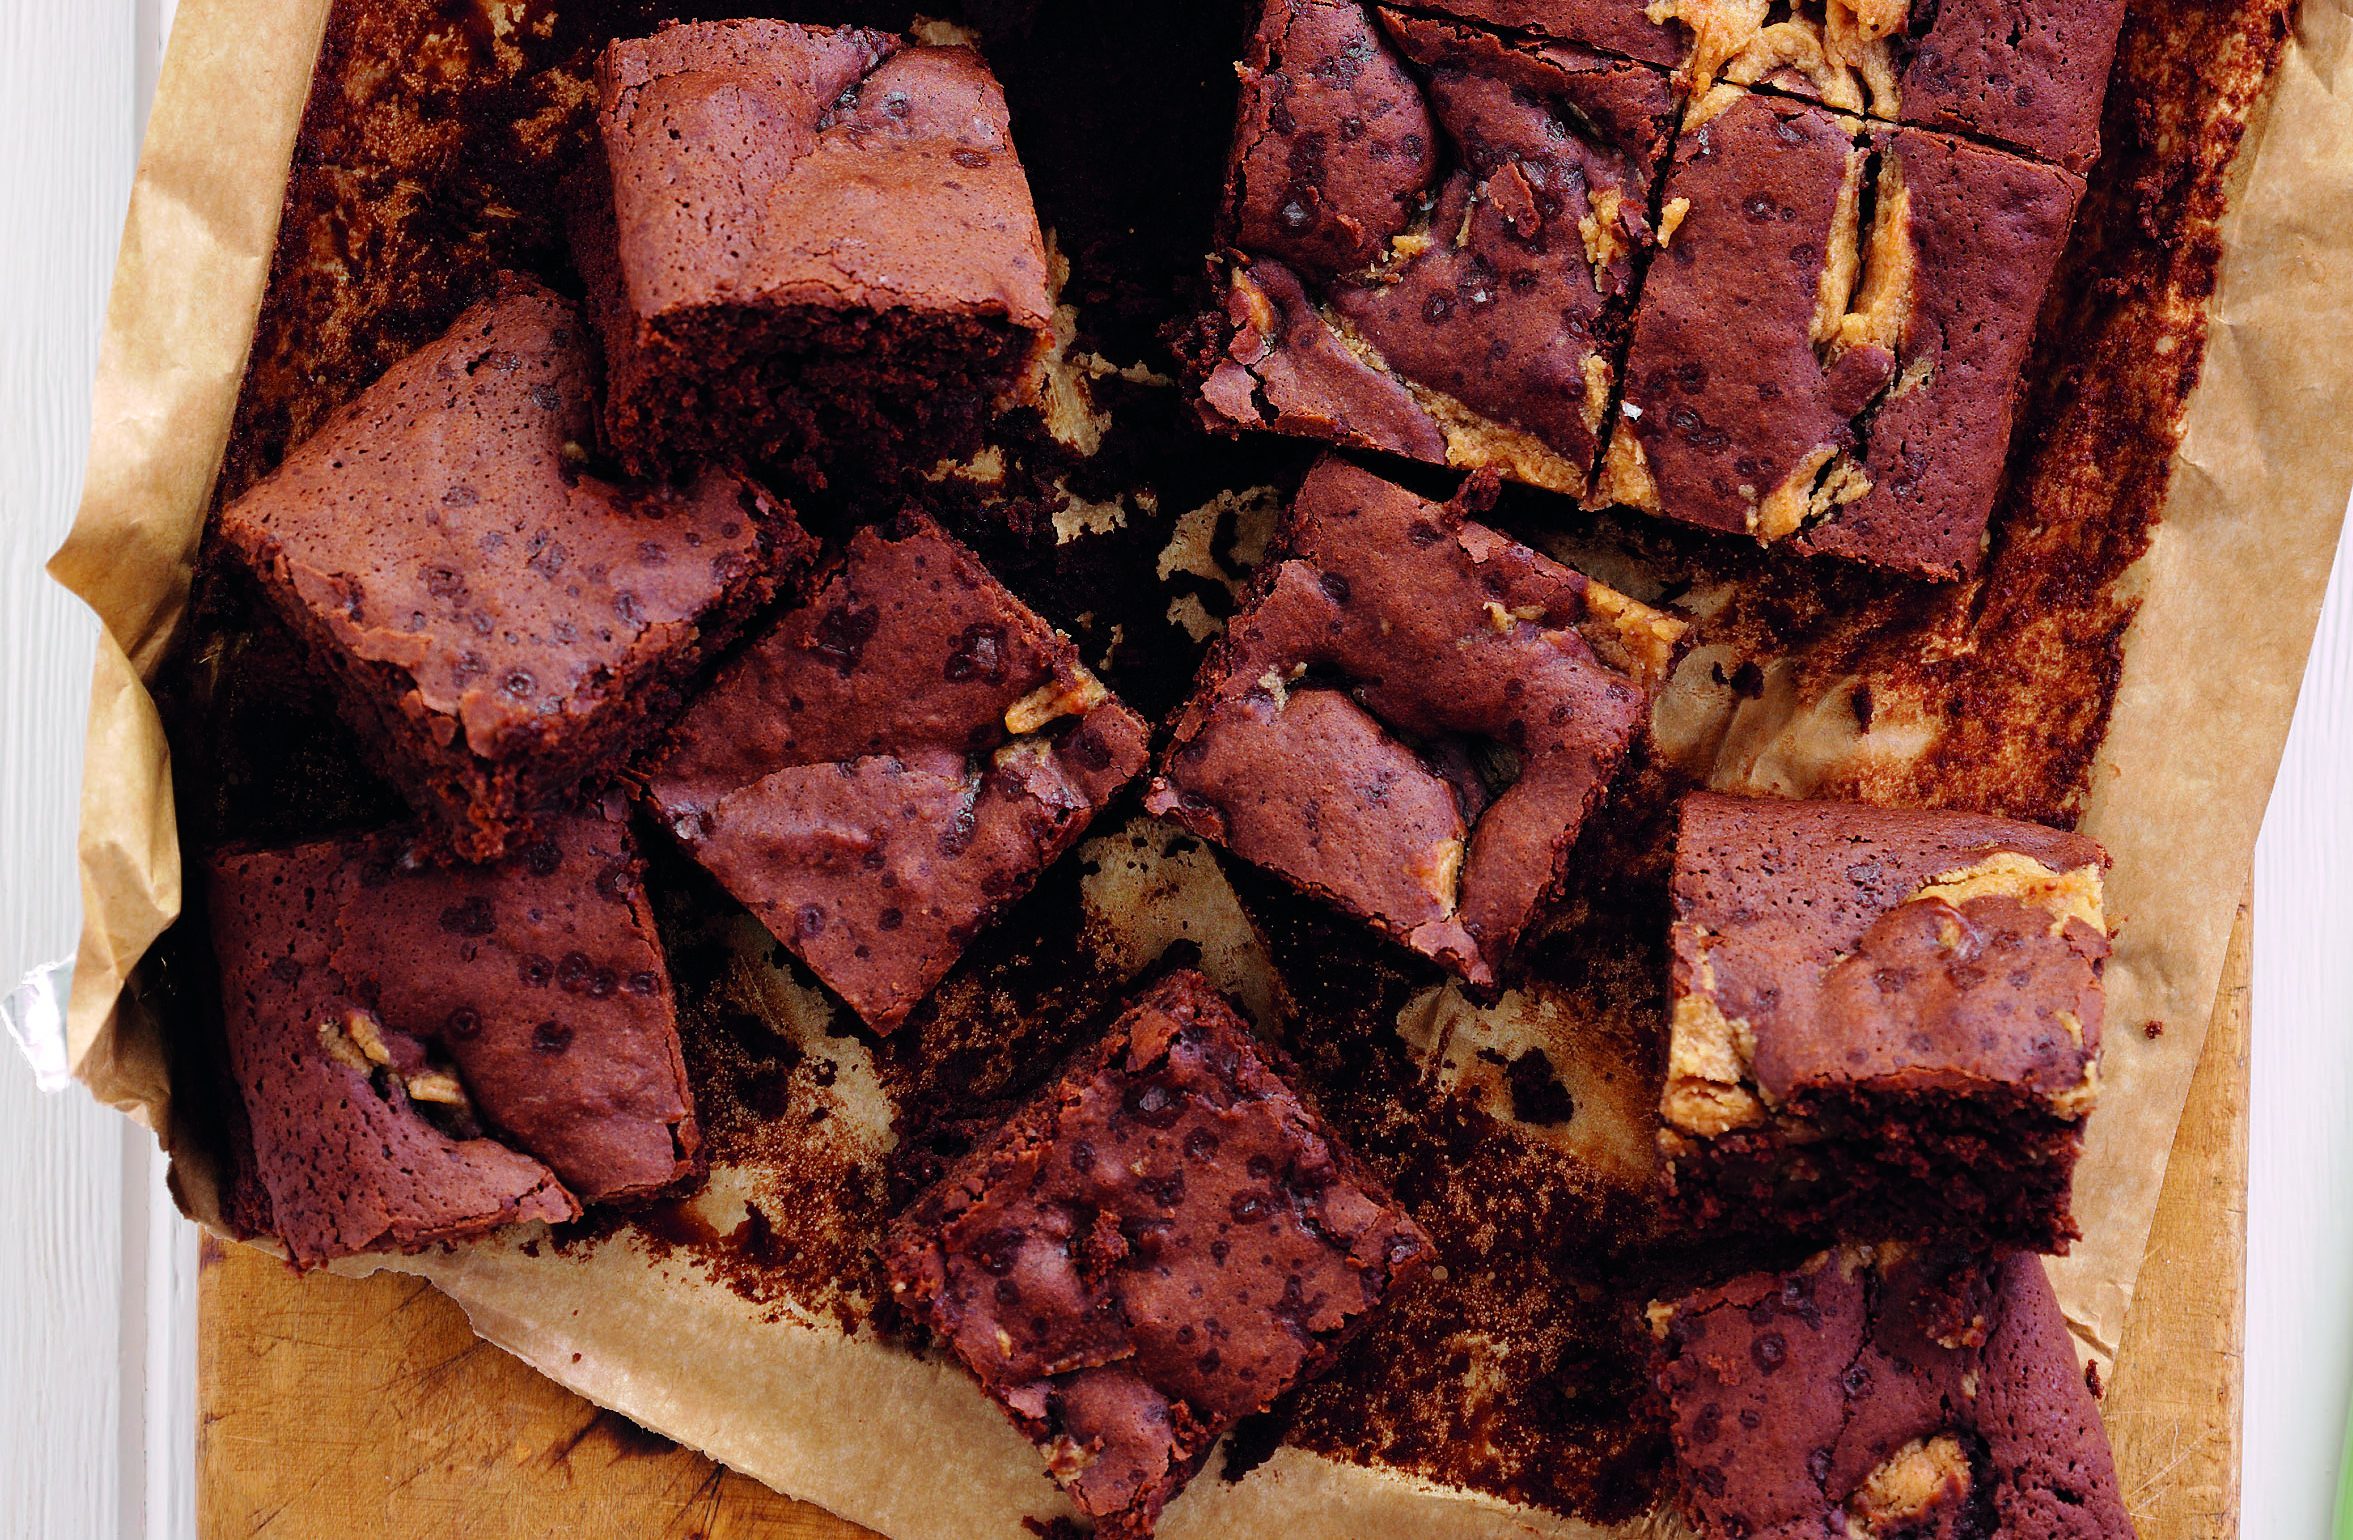 The delicious brownies